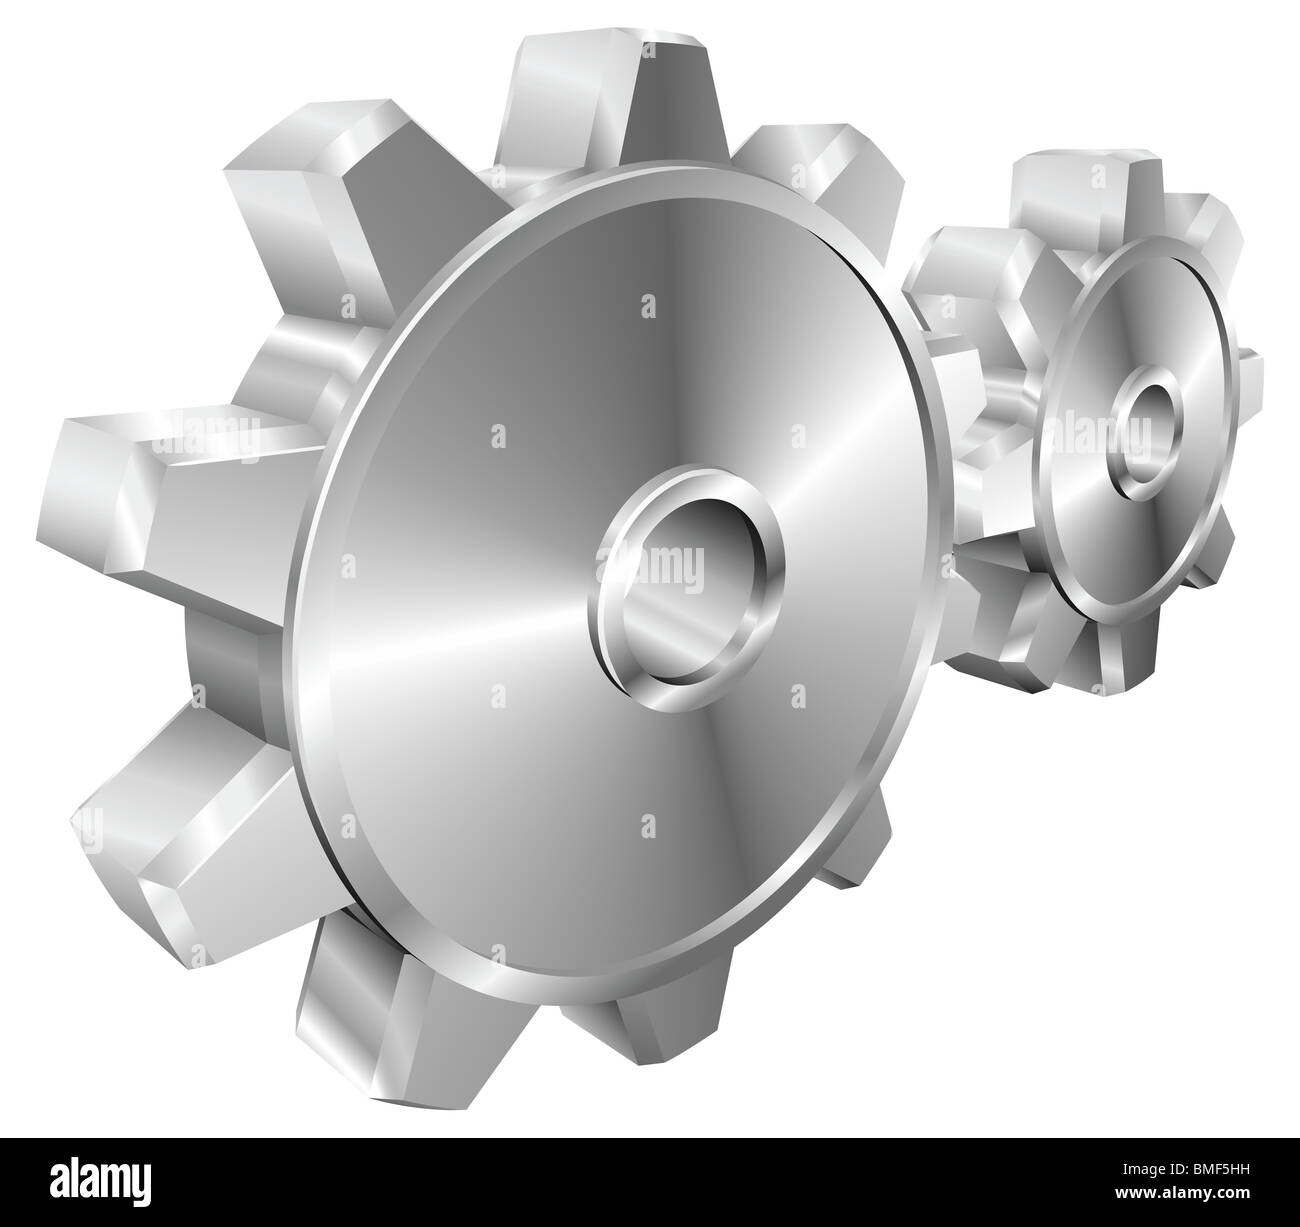 A pair of shiny silver steel metallic cog or gear wheels vector illustration with dynamic perspective. Stock Photo